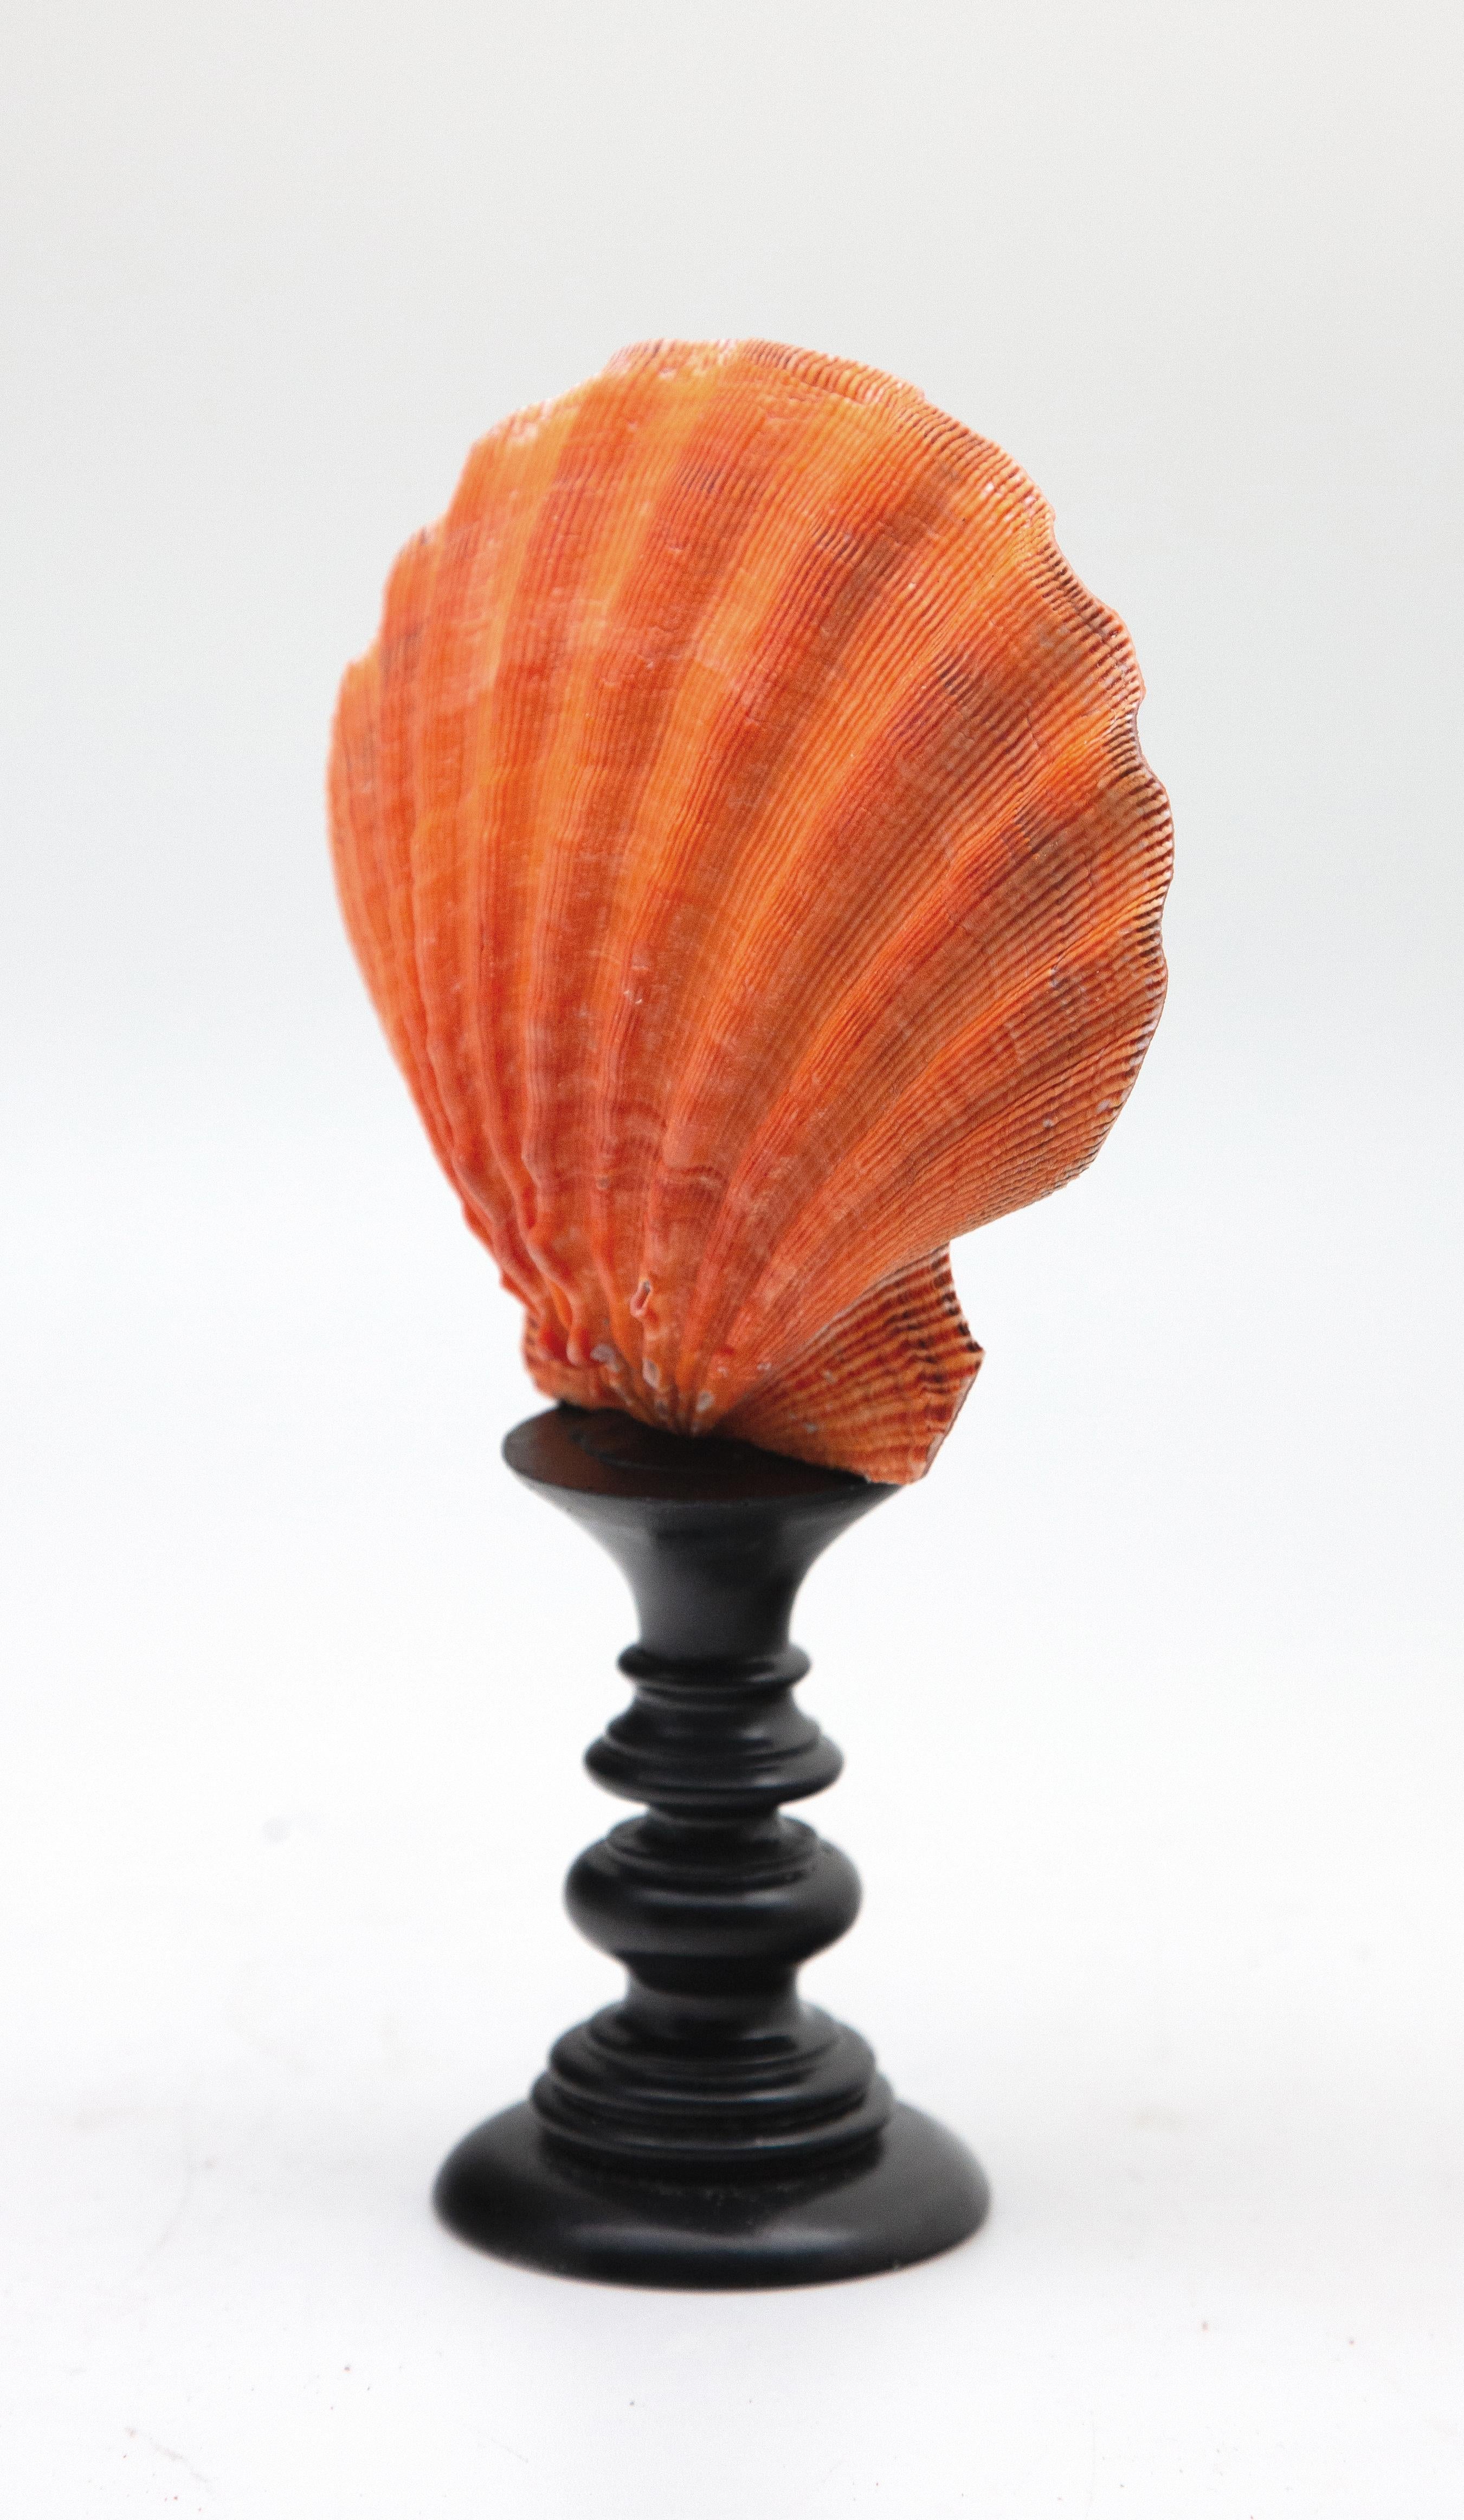 Mounted coral color Pecten on turned wood stand. Coral colored pecten mounted on black turned-wood stand. Measure: 8.5